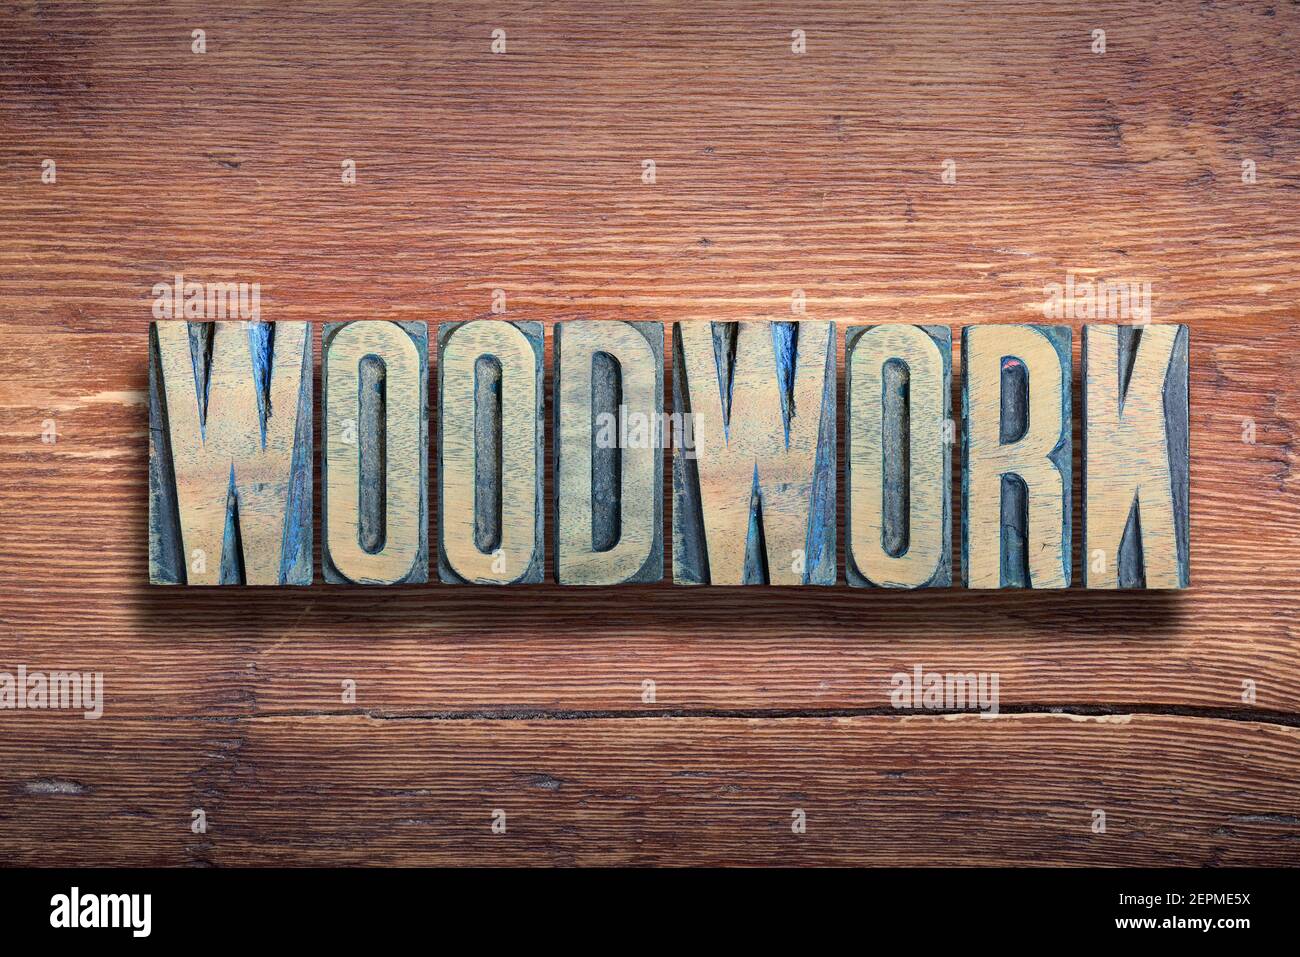 woodwork word combined on vintage varnished wooden surface Stock Photo